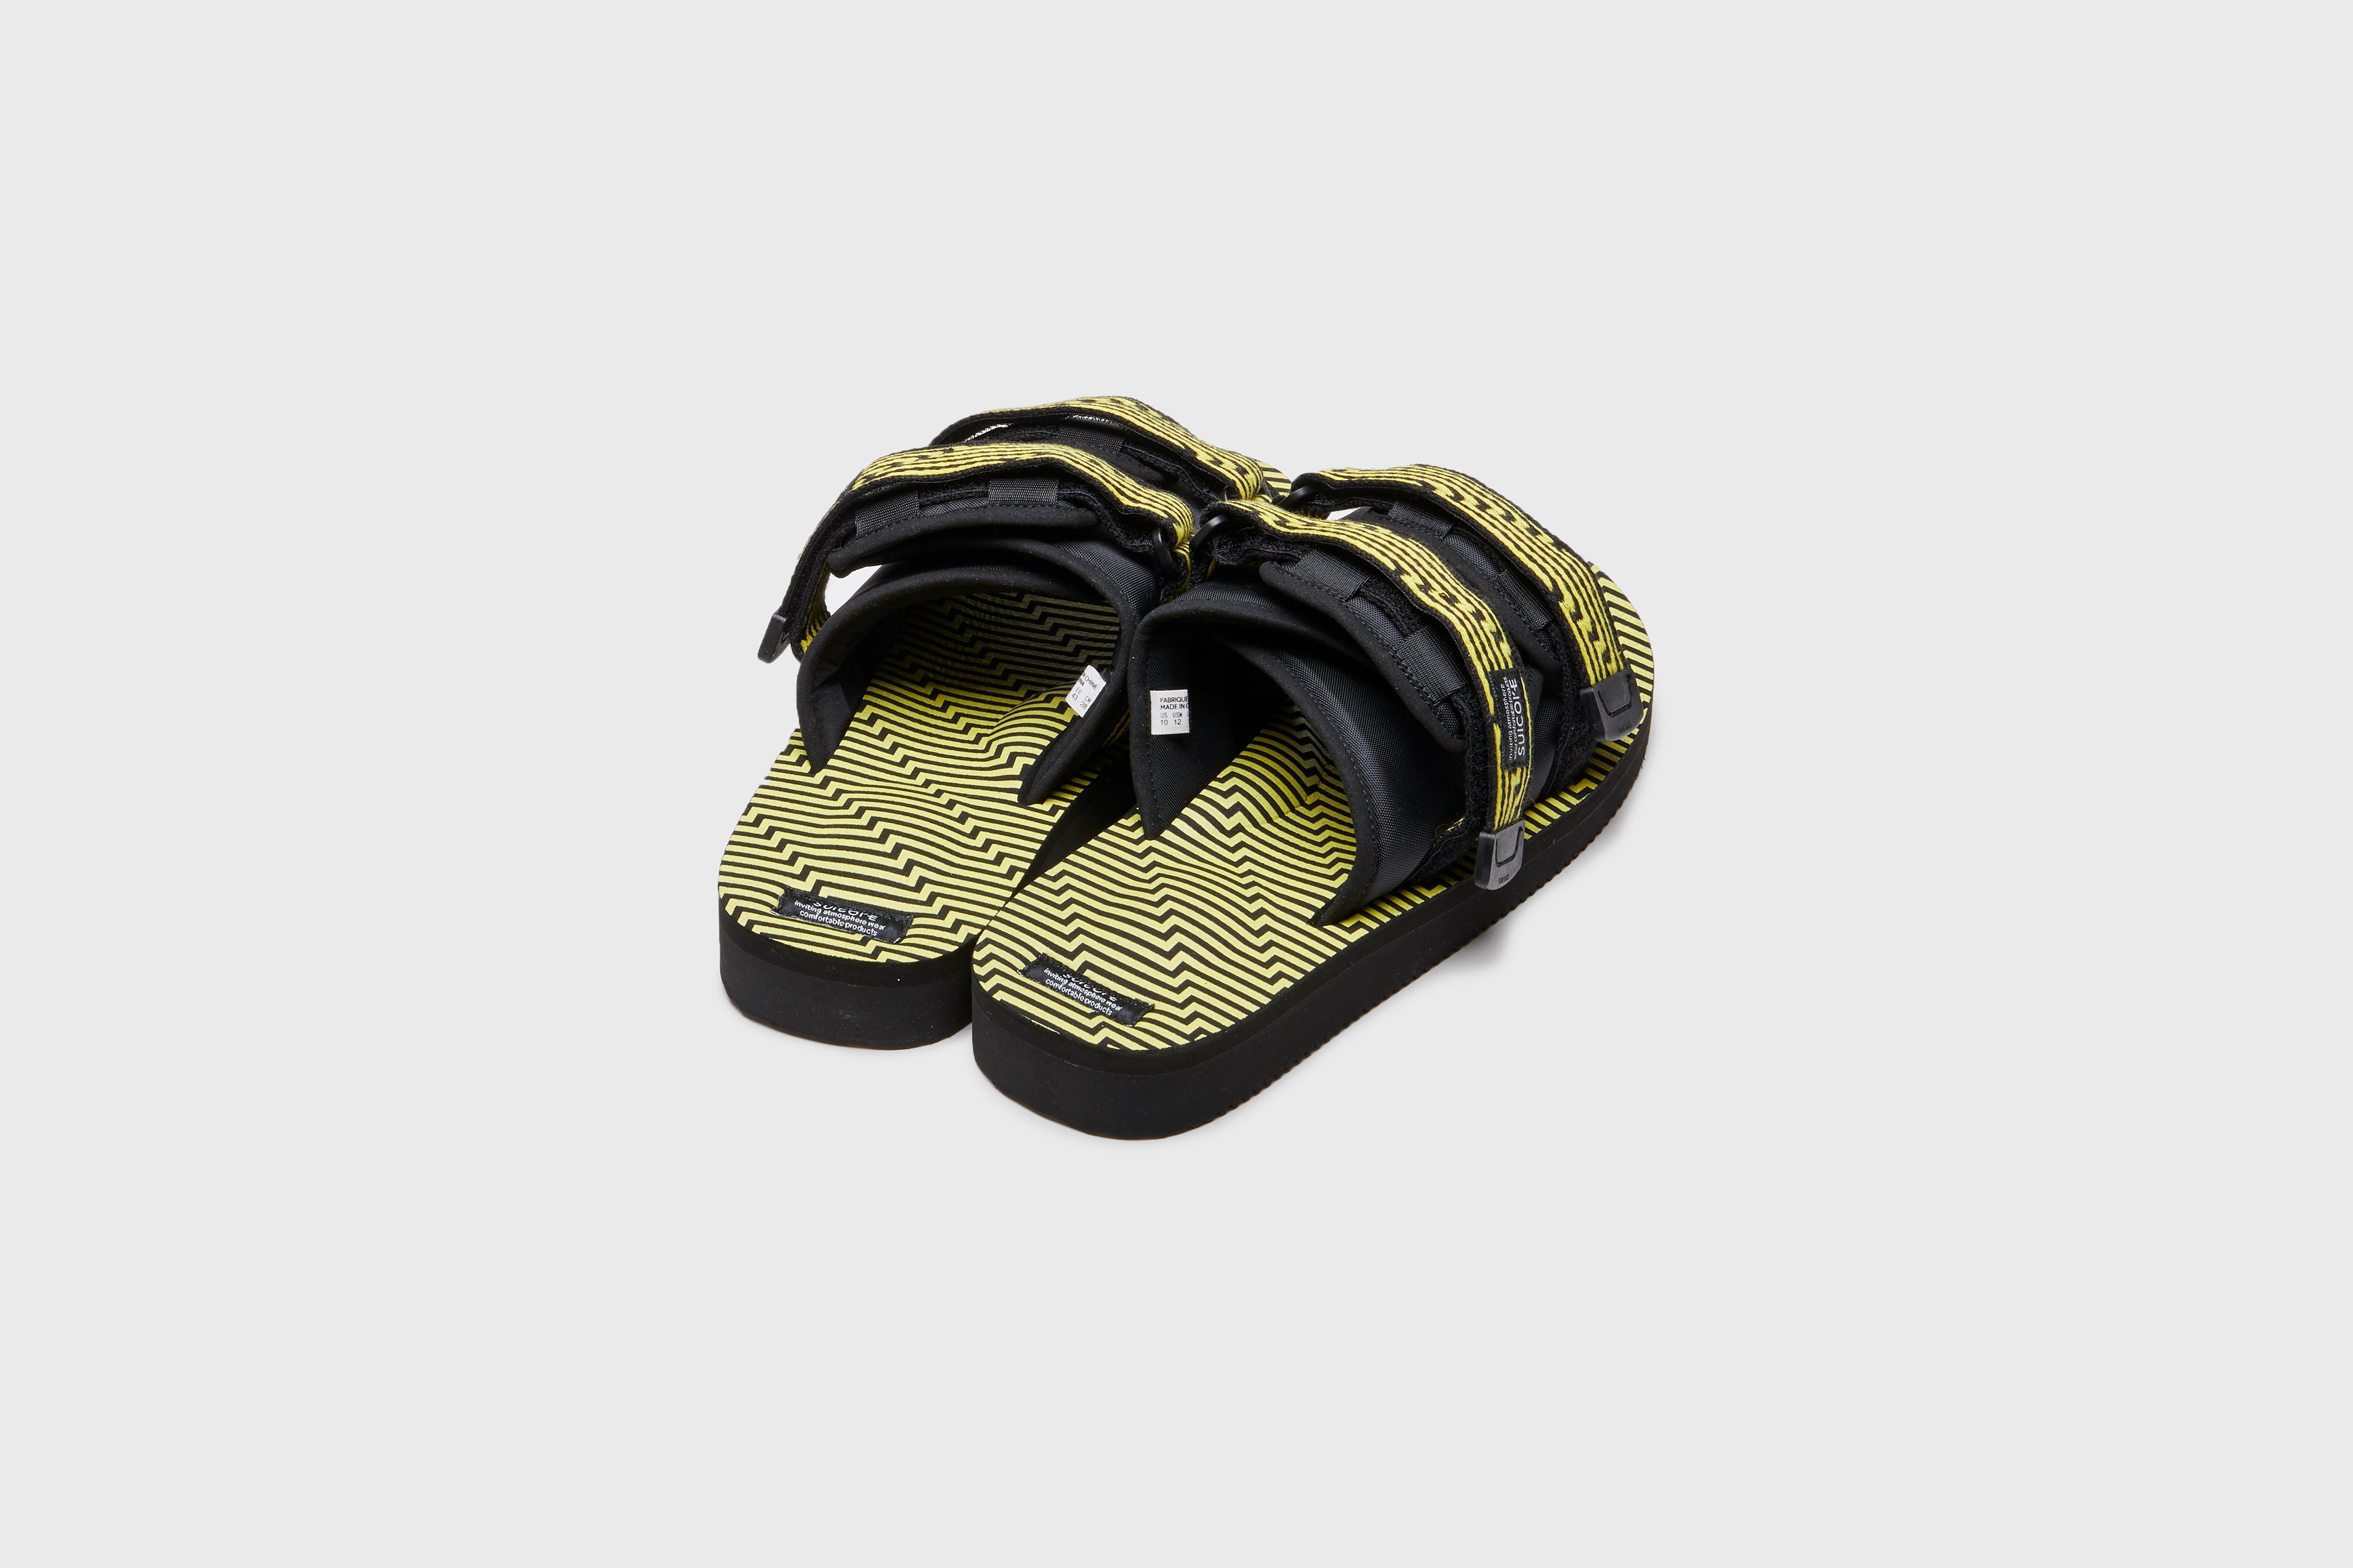 SUICOKE MOTO-JC01 slides with black &amp; yellow nylon and synthetic material  upper, black &amp; yellow midsole and sole, straps and logo patch. From Spring/Summer 2023 collection on eightywingold Web Store, an official partner of SUICOKE. OG-056-JC01 BLACK X YELLOW